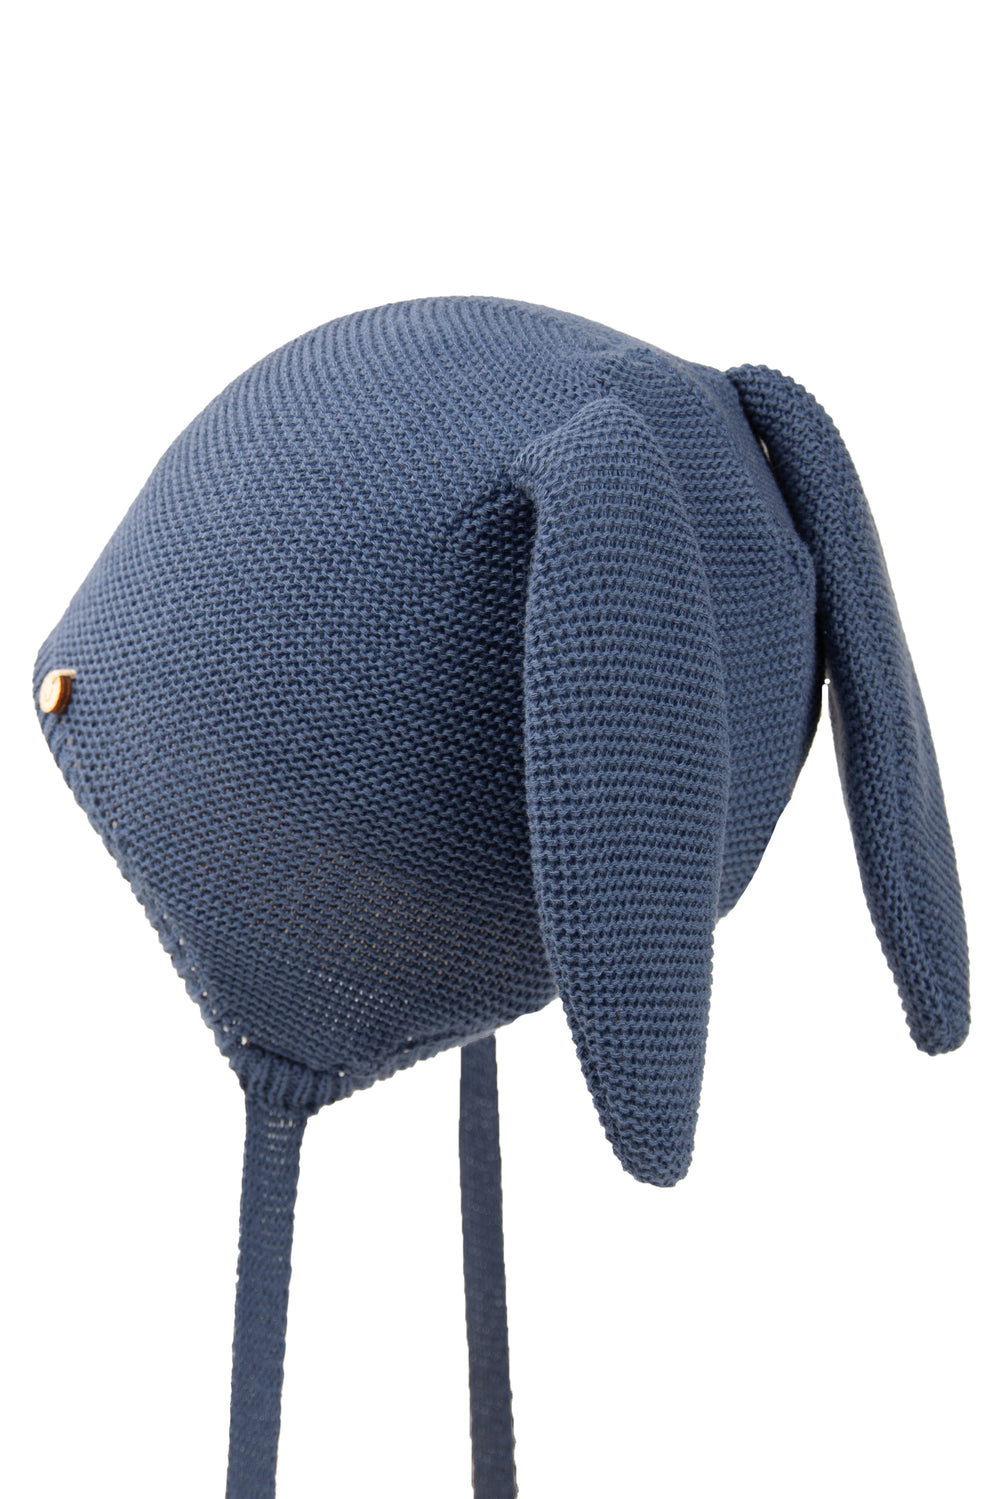 Jamiks "Bugs" Denim Blue Knit Bunny Hat | iphoneandroidapplications